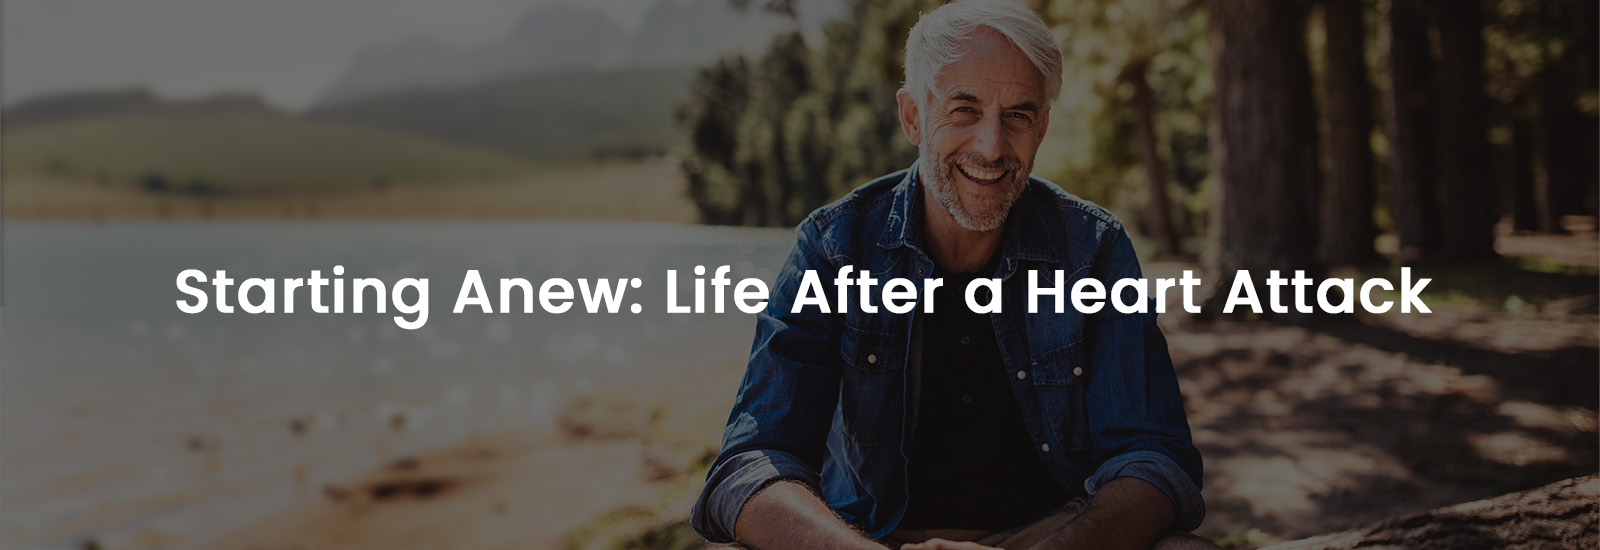 Starting Anew - Life After a Heart Attack | Banner Image